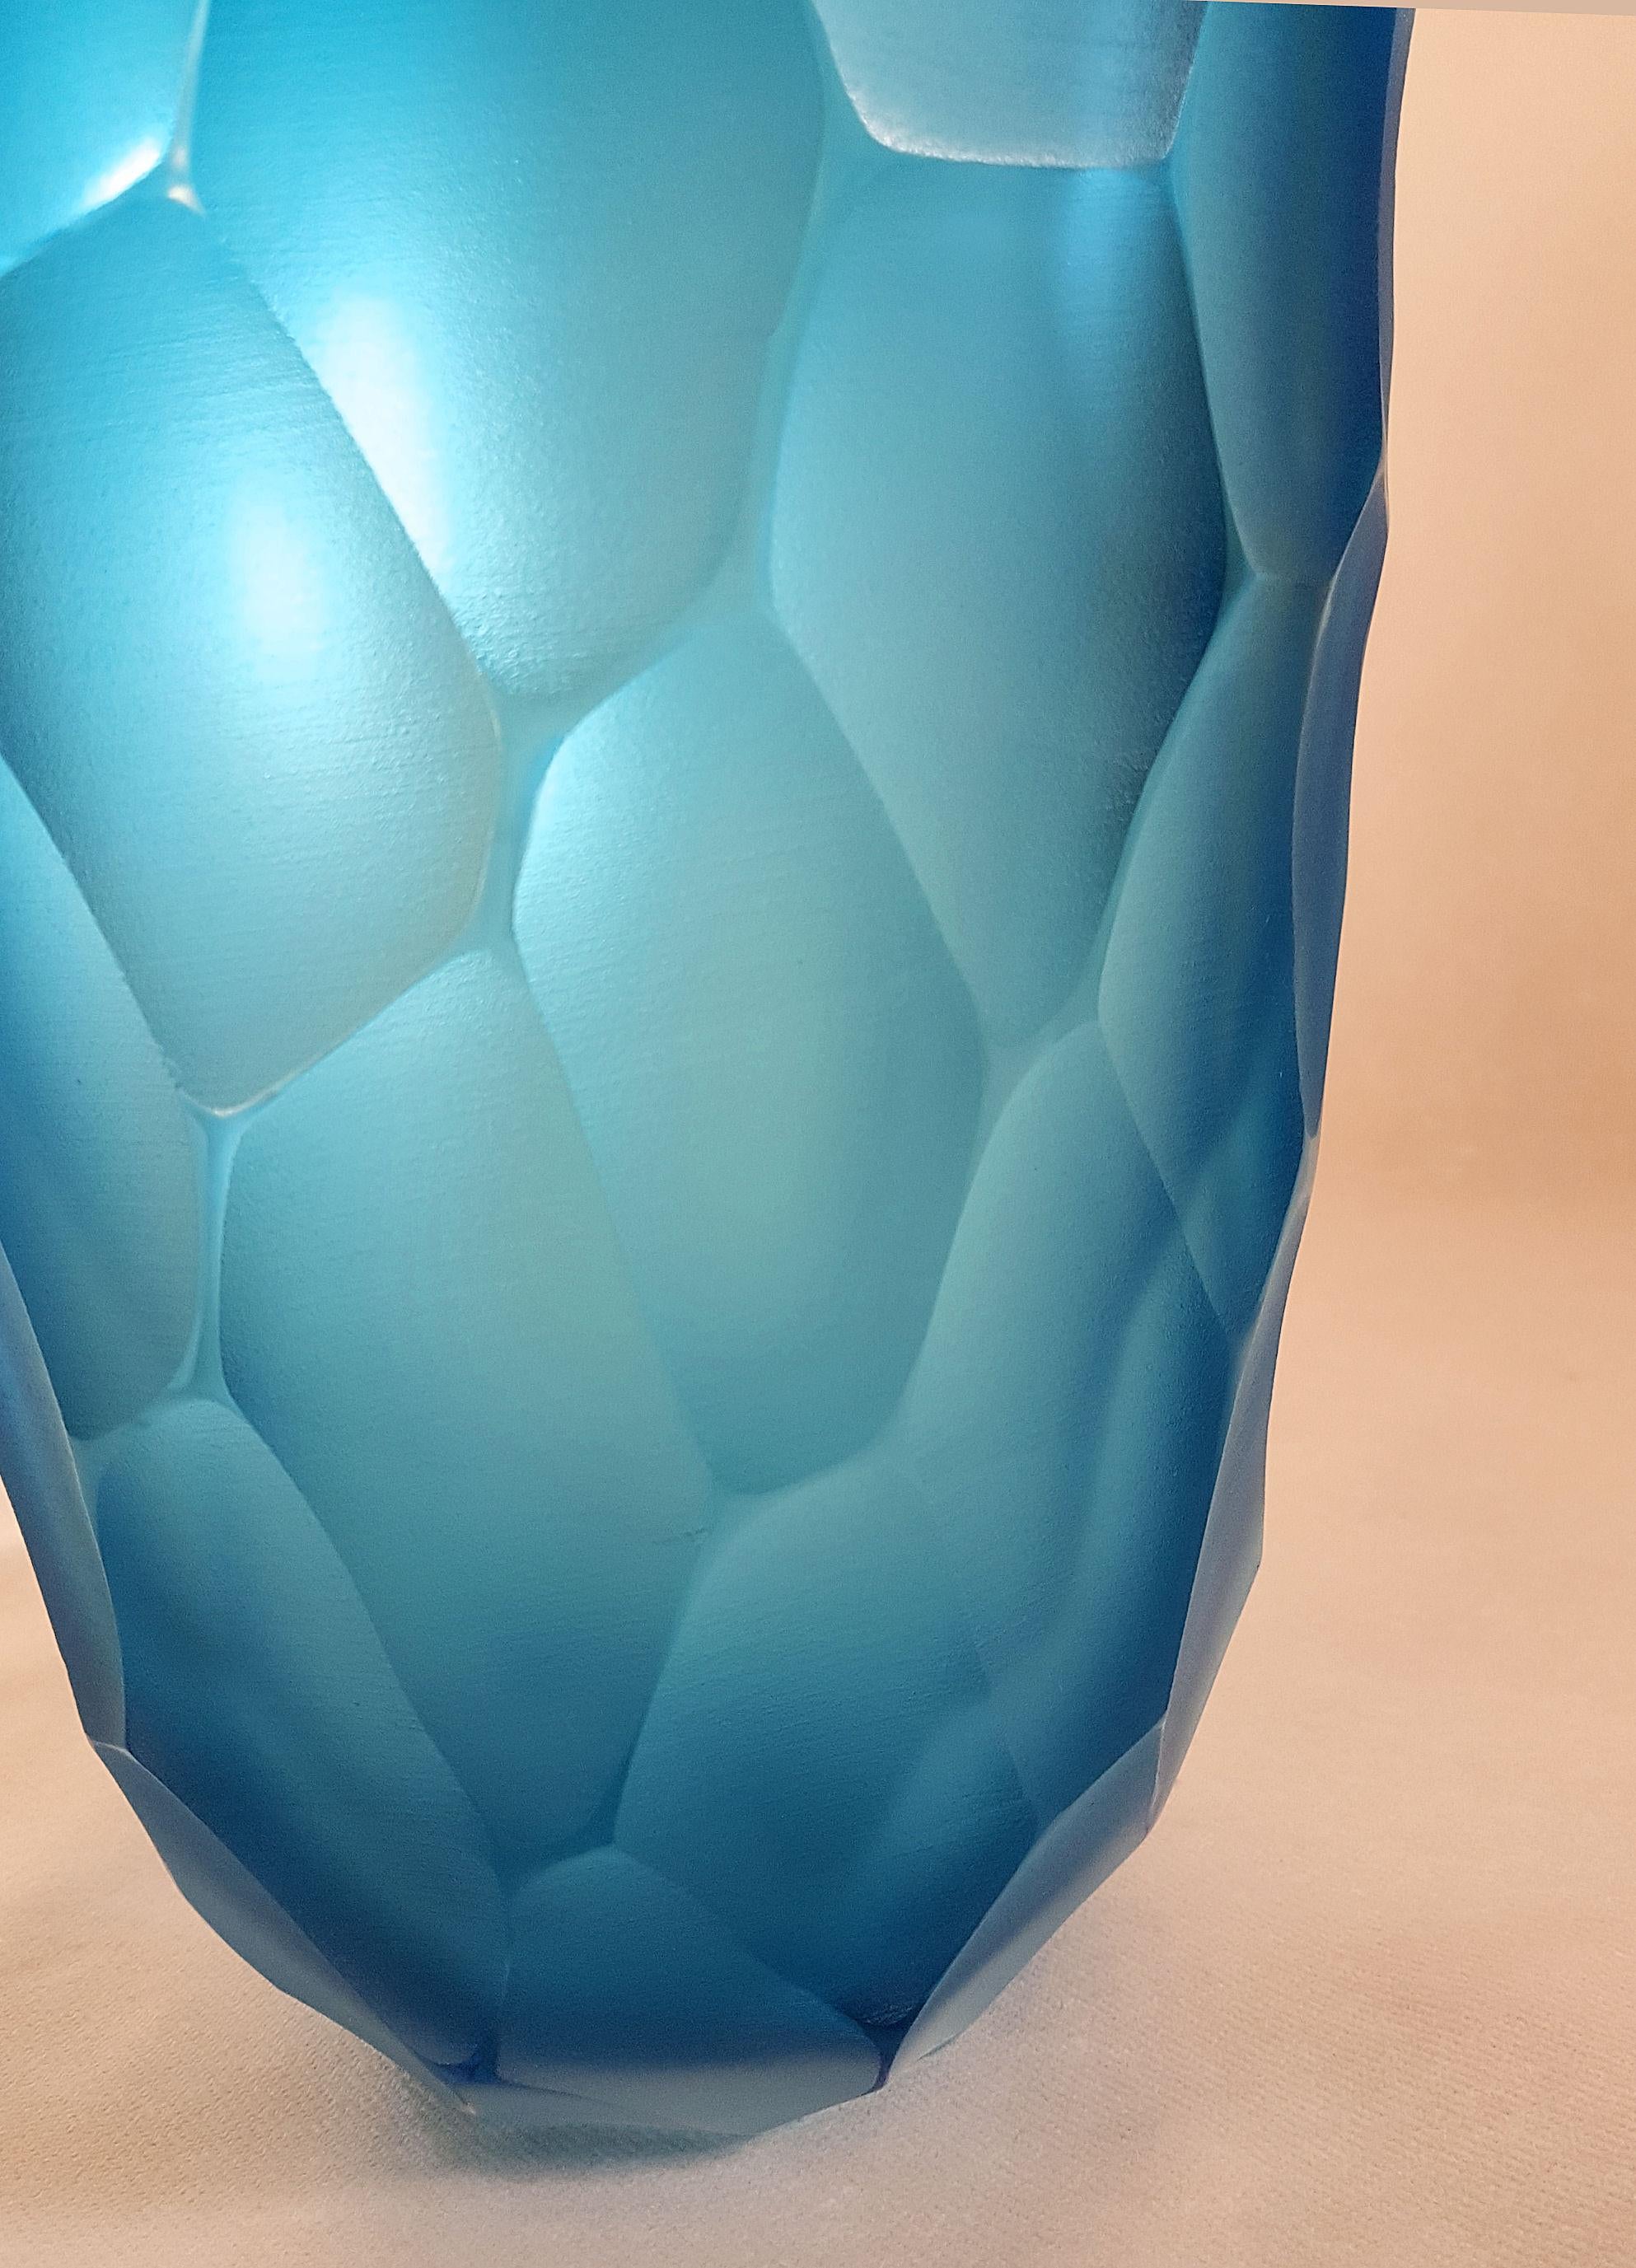 Late 20th Century Large Mid-Century Modern Blue Faceted Murano Glass Vase by Simone Cenedese Italy